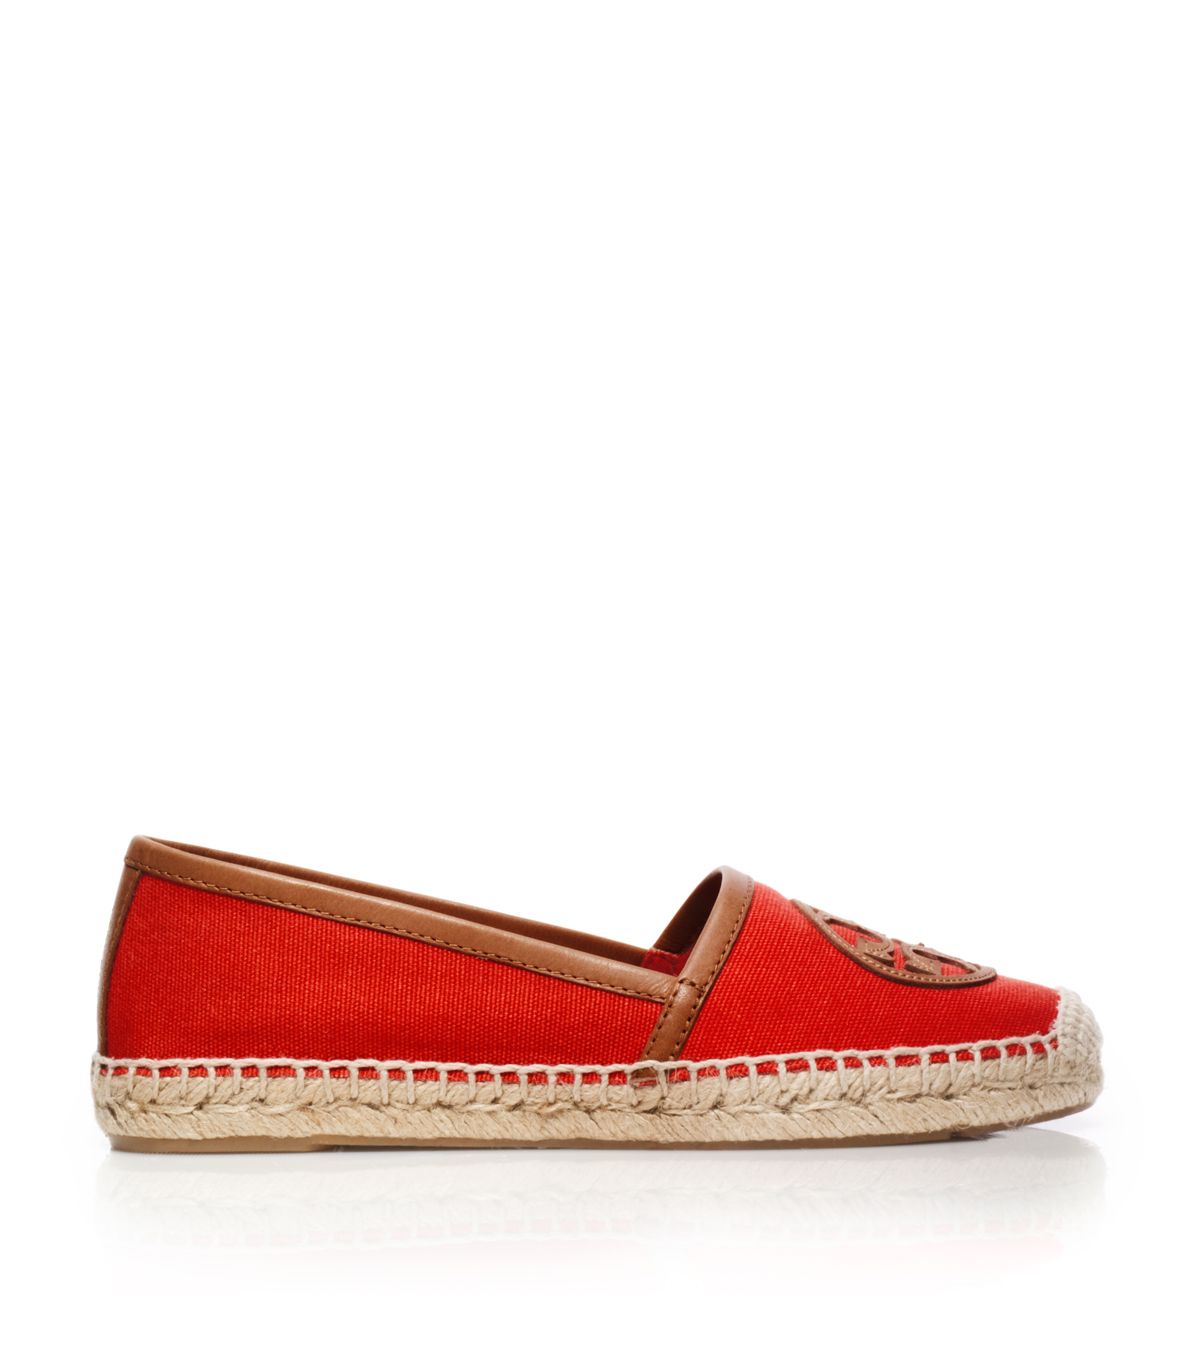 Lyst - Tory burch Angus Flat Espadrille in Red